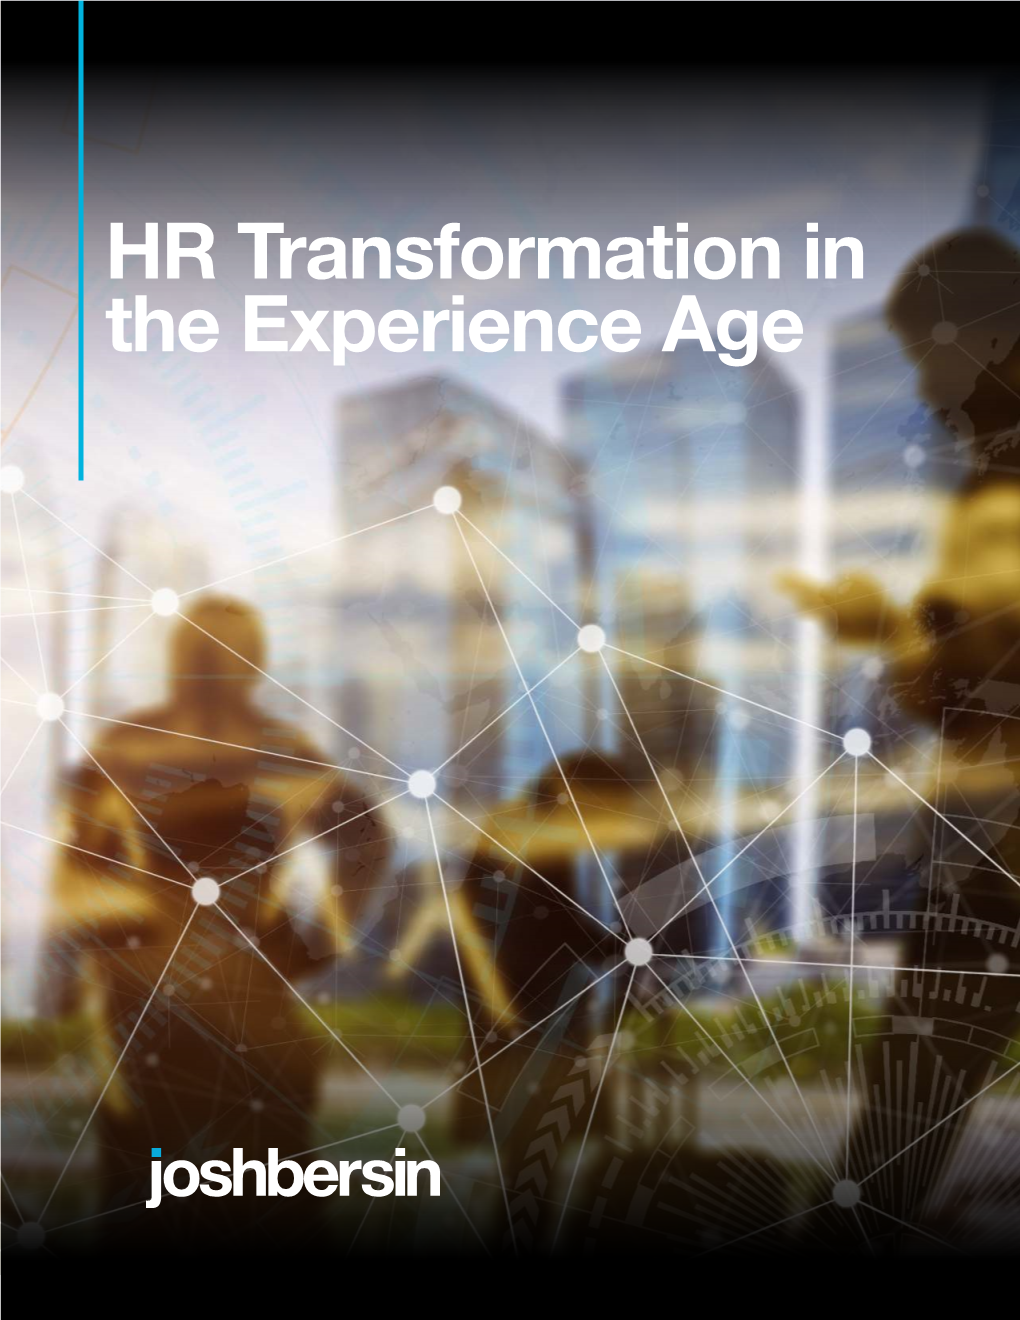 HR Transformation in the Experience